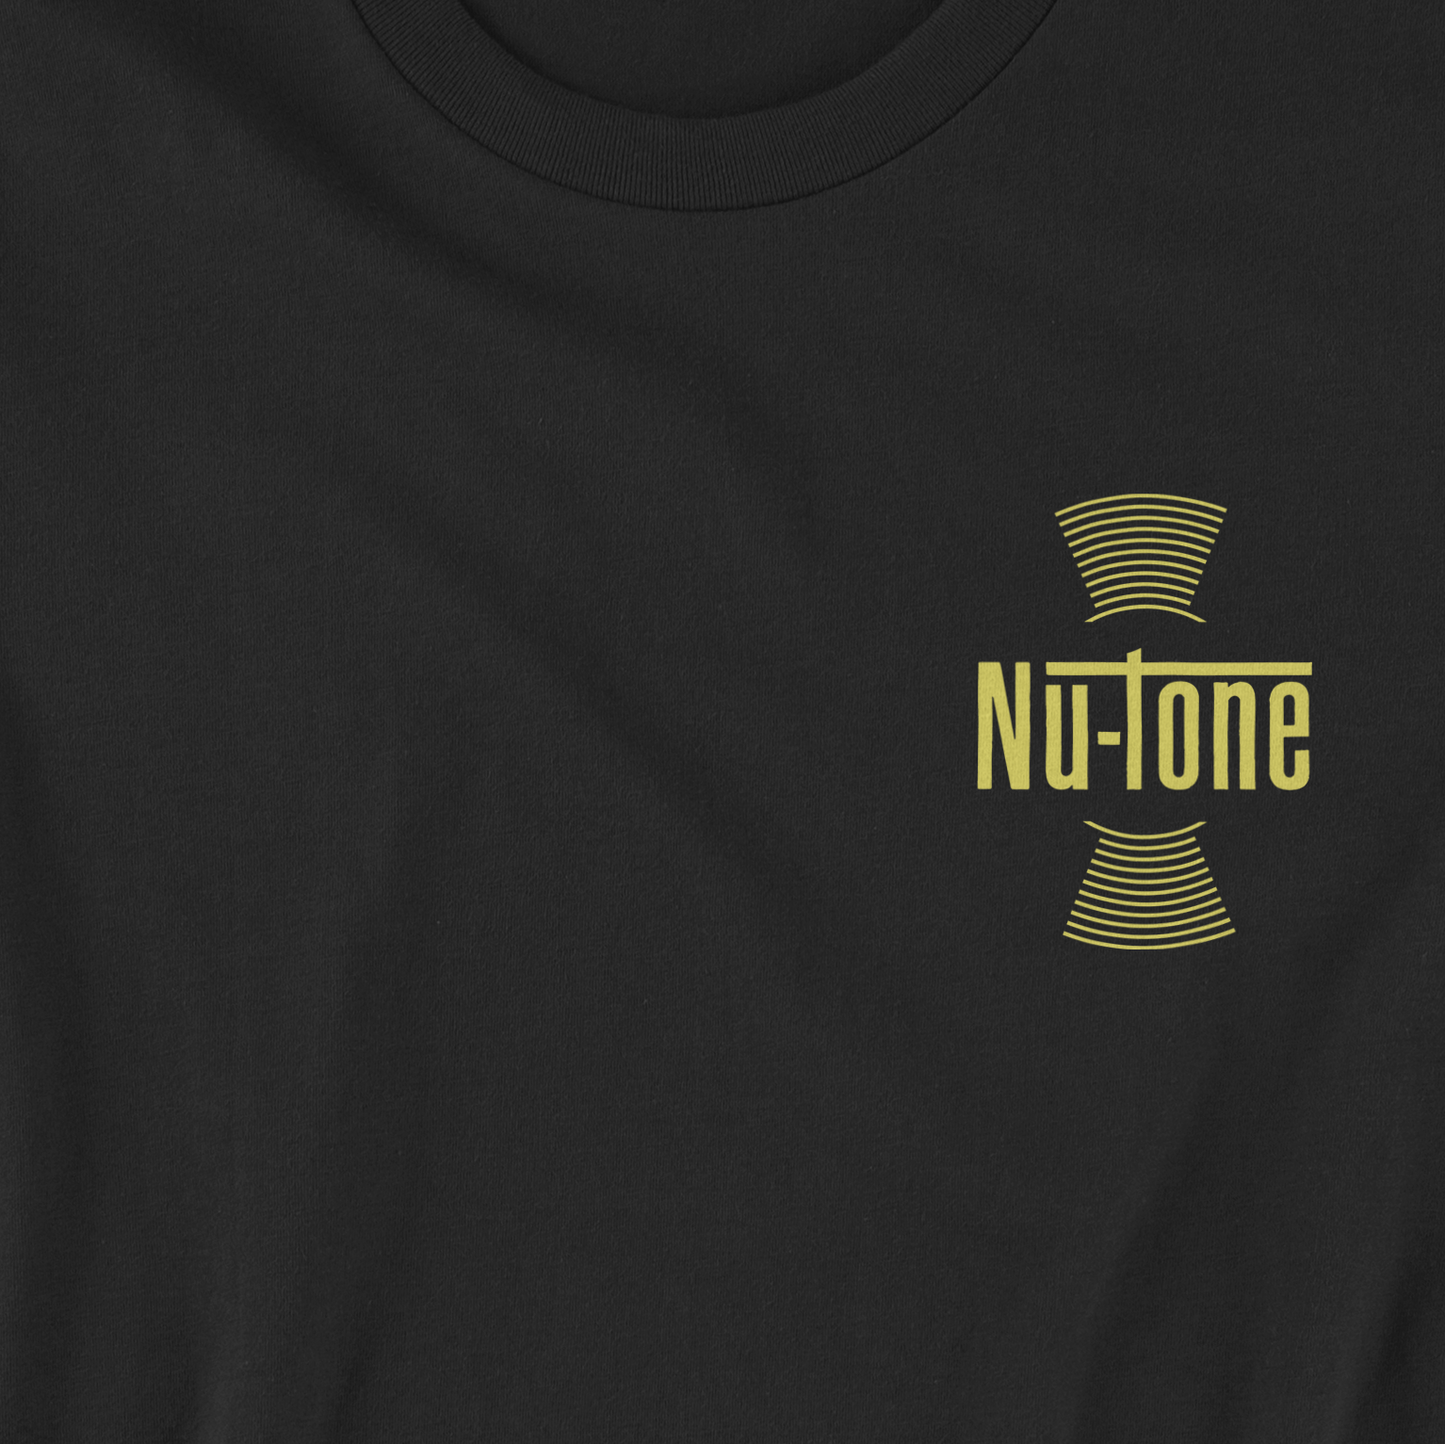 Nu-Tone "The Sounds of Tomorrow, Today" T